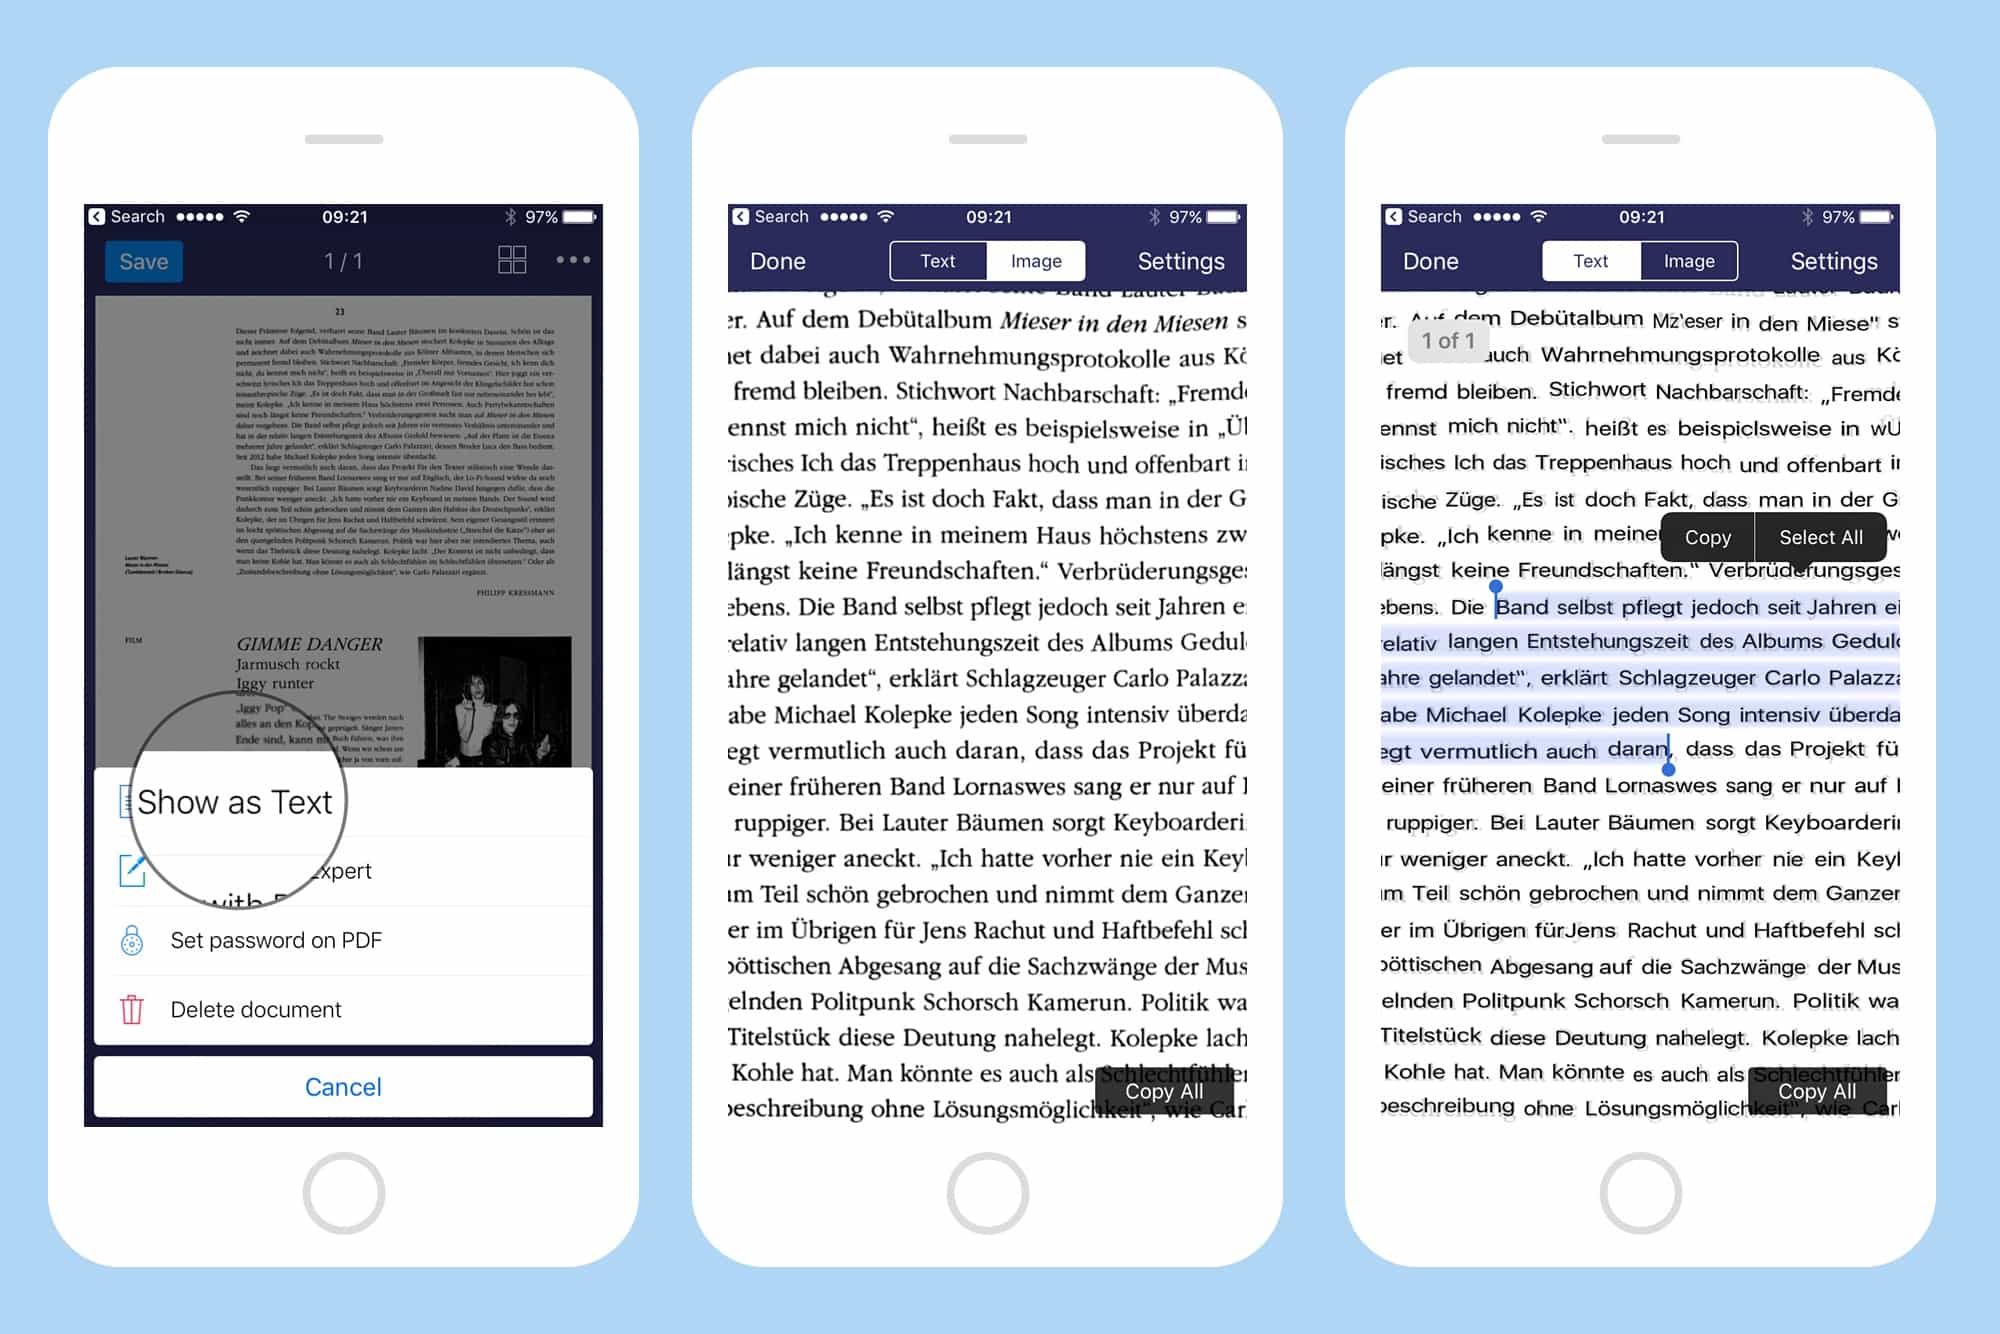 Scanned text is turned into editable text automatically.